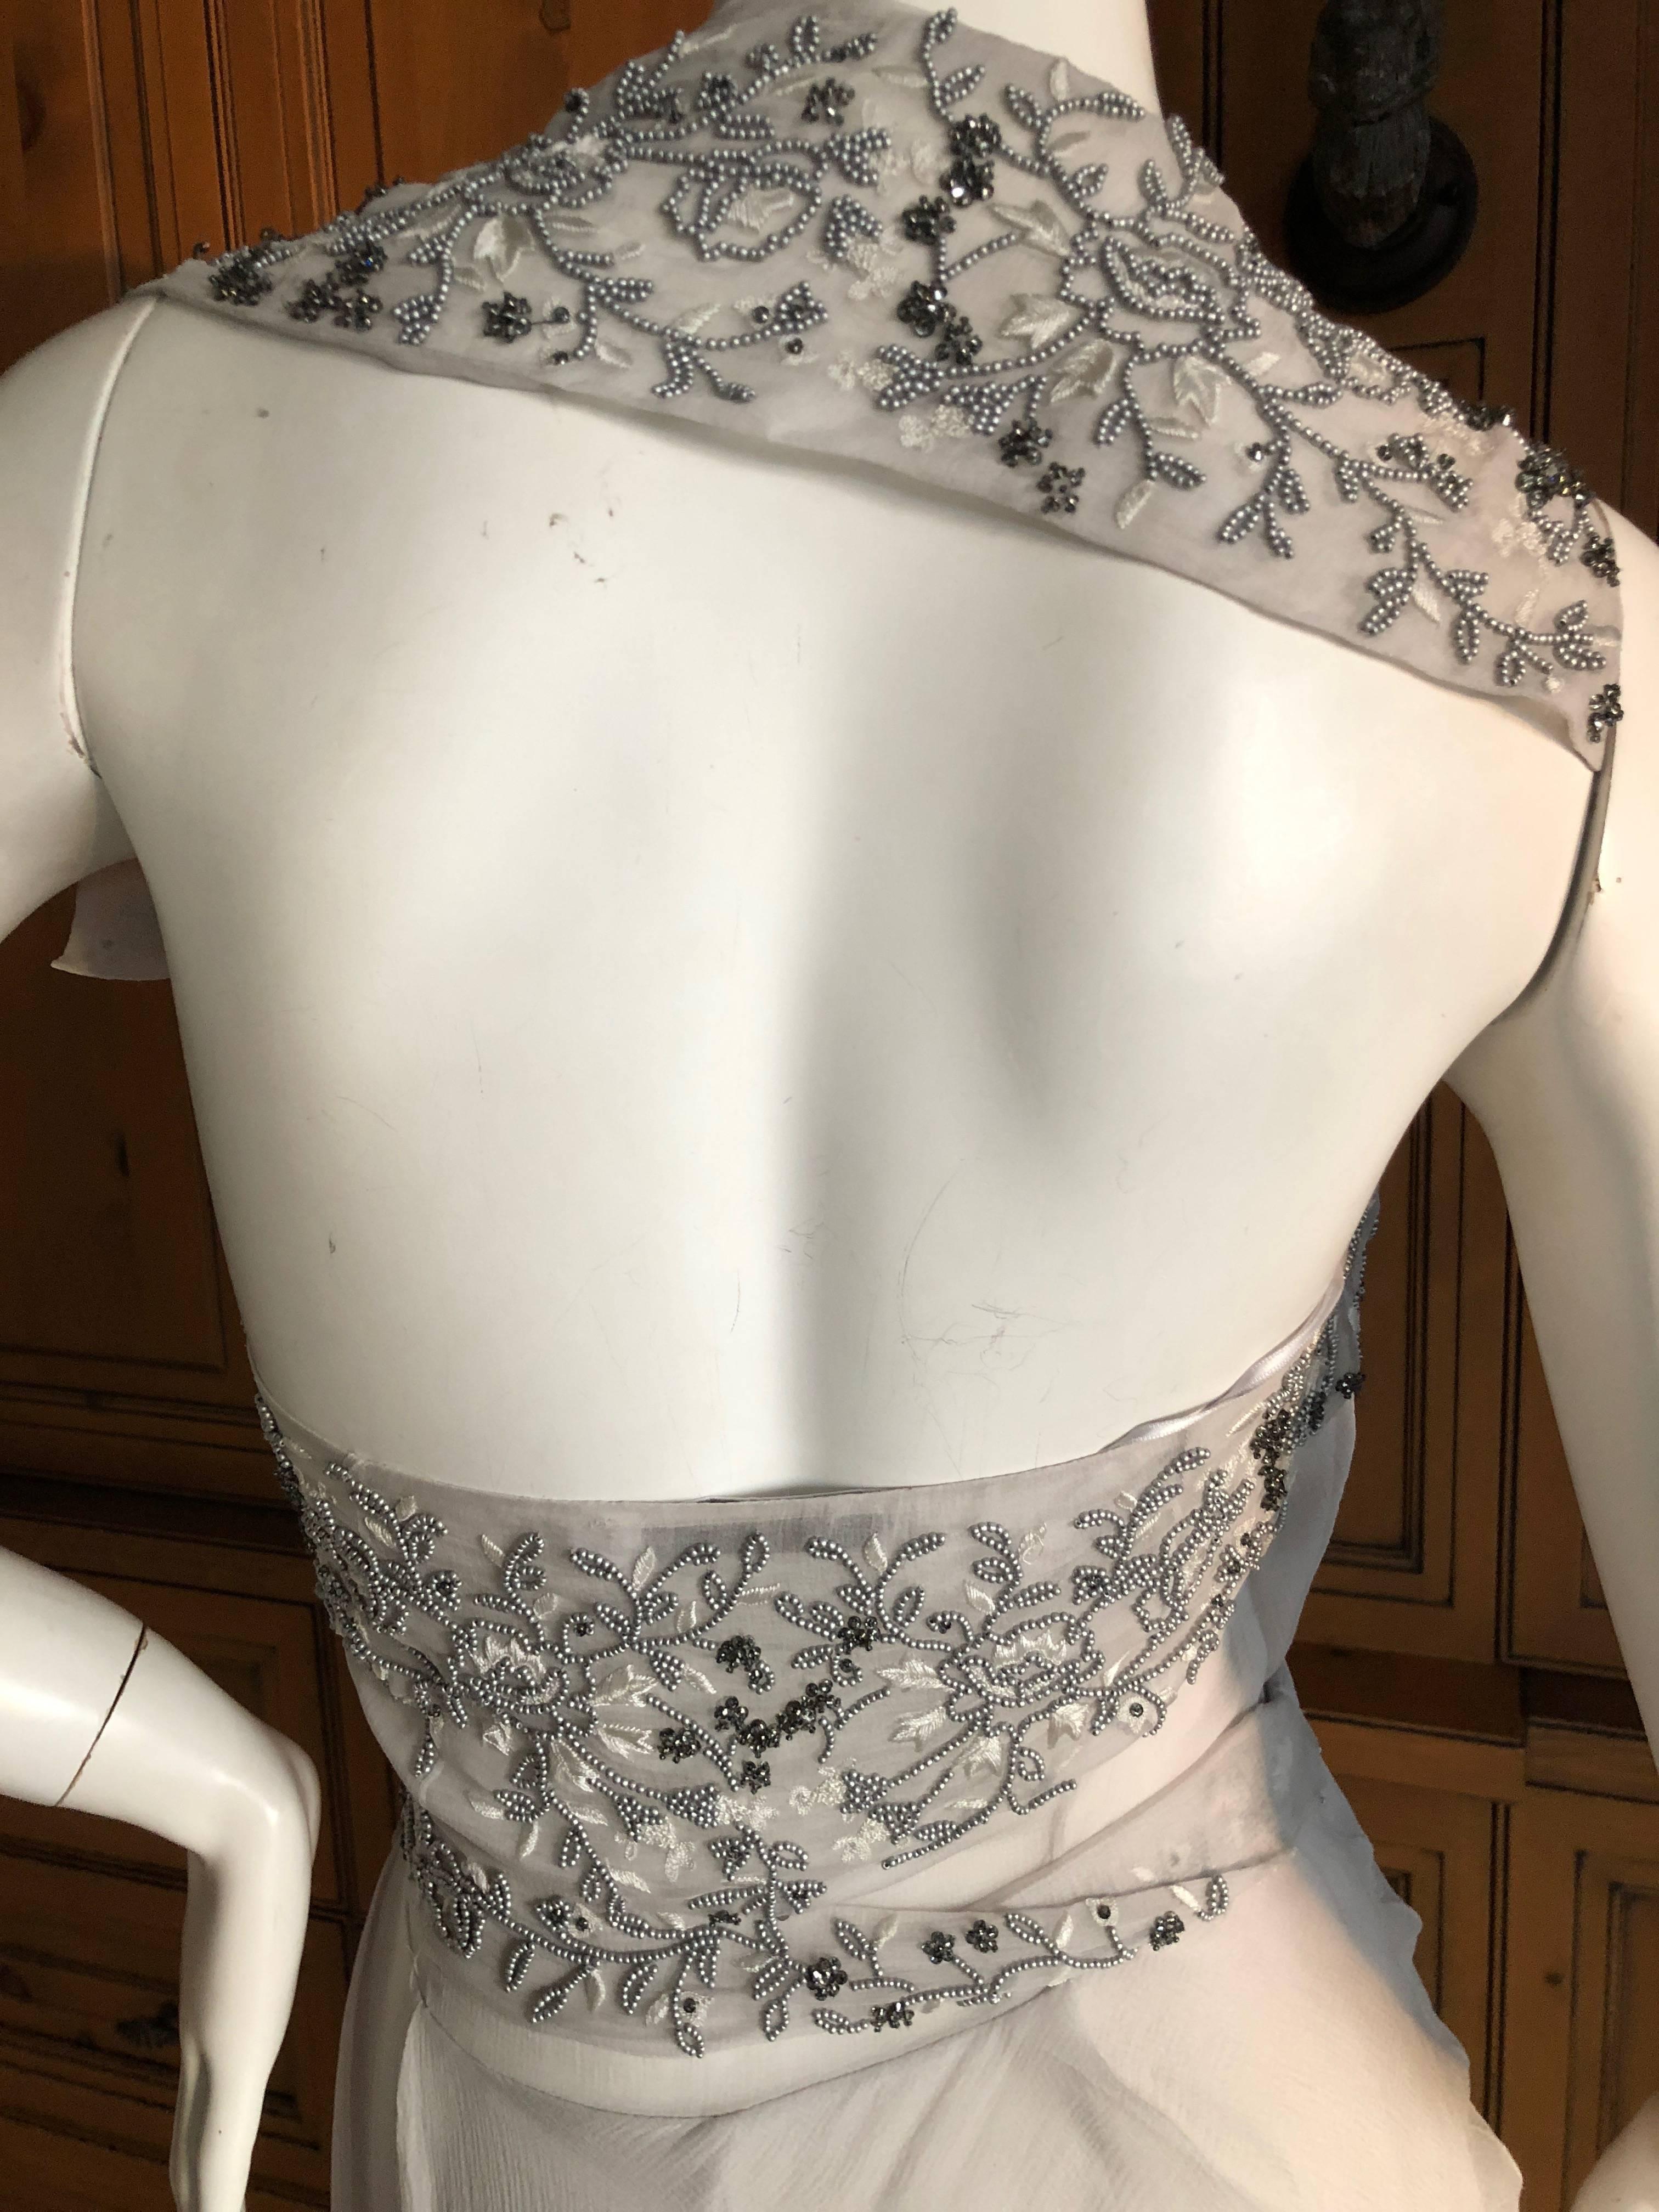 Christian Dior by John Galliano Dove Gray Evening Dress with Lesage Bead Flowers For Sale 4